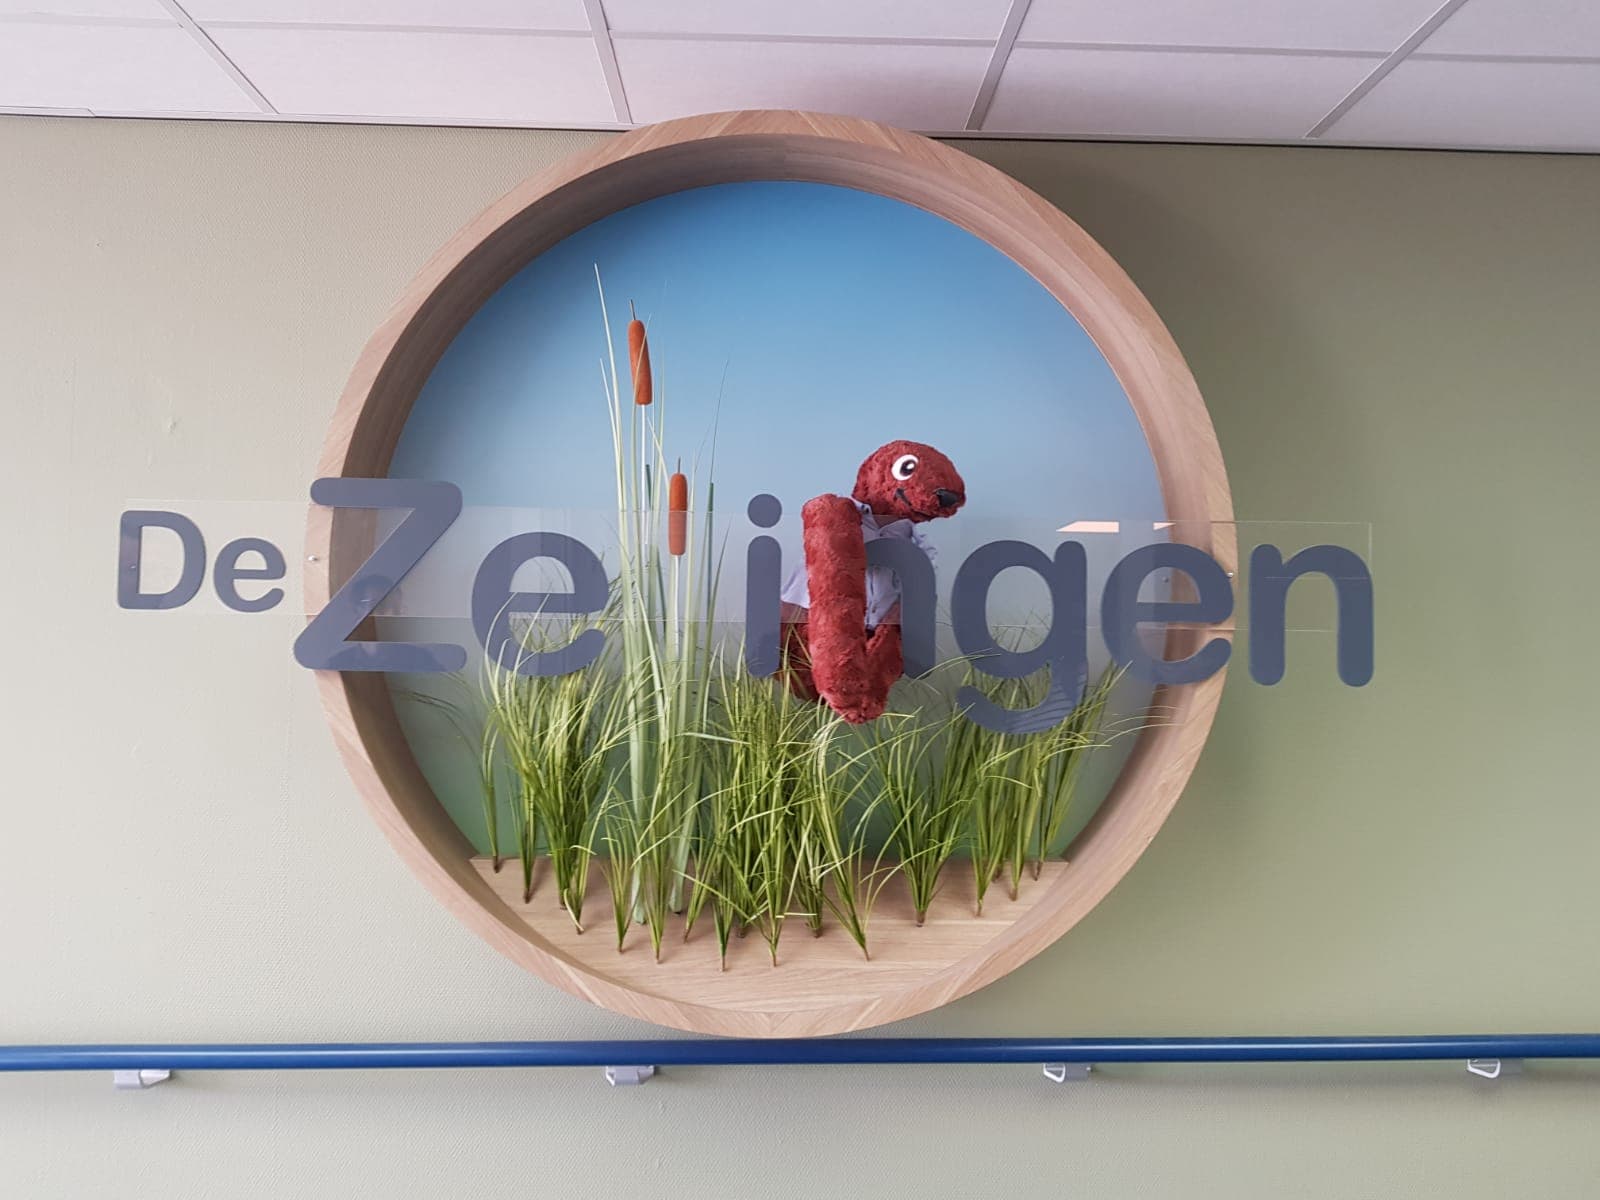 Sid hugging the big physical logo of the Zellingen located in the main hall.